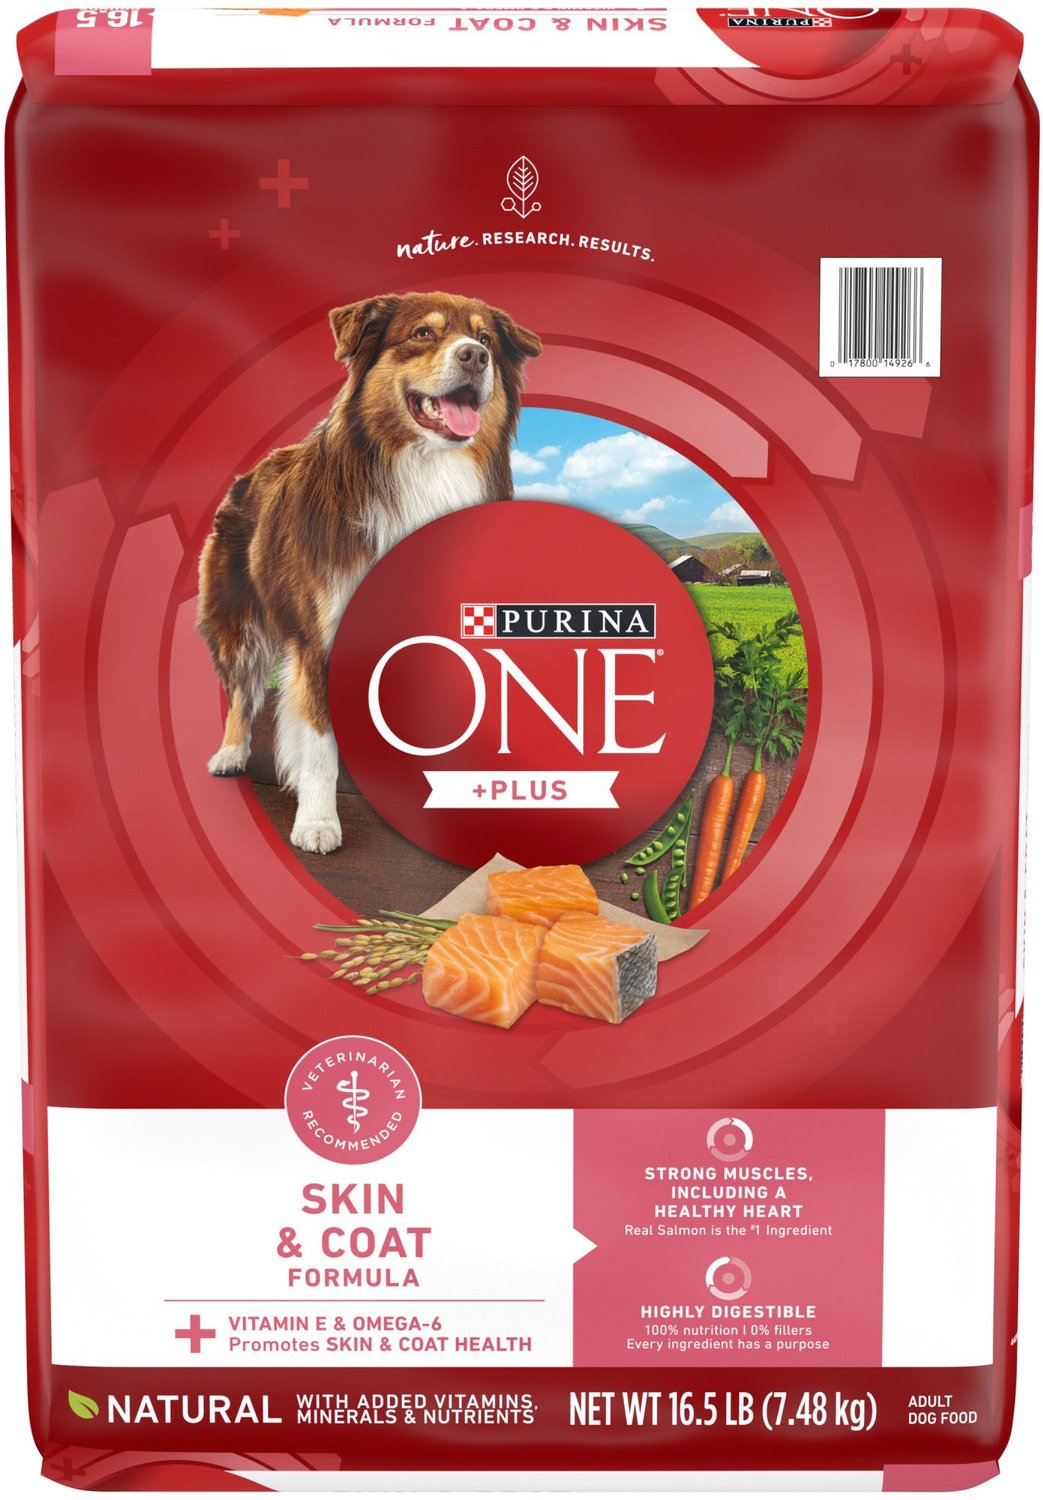 how does purina one dog food rate